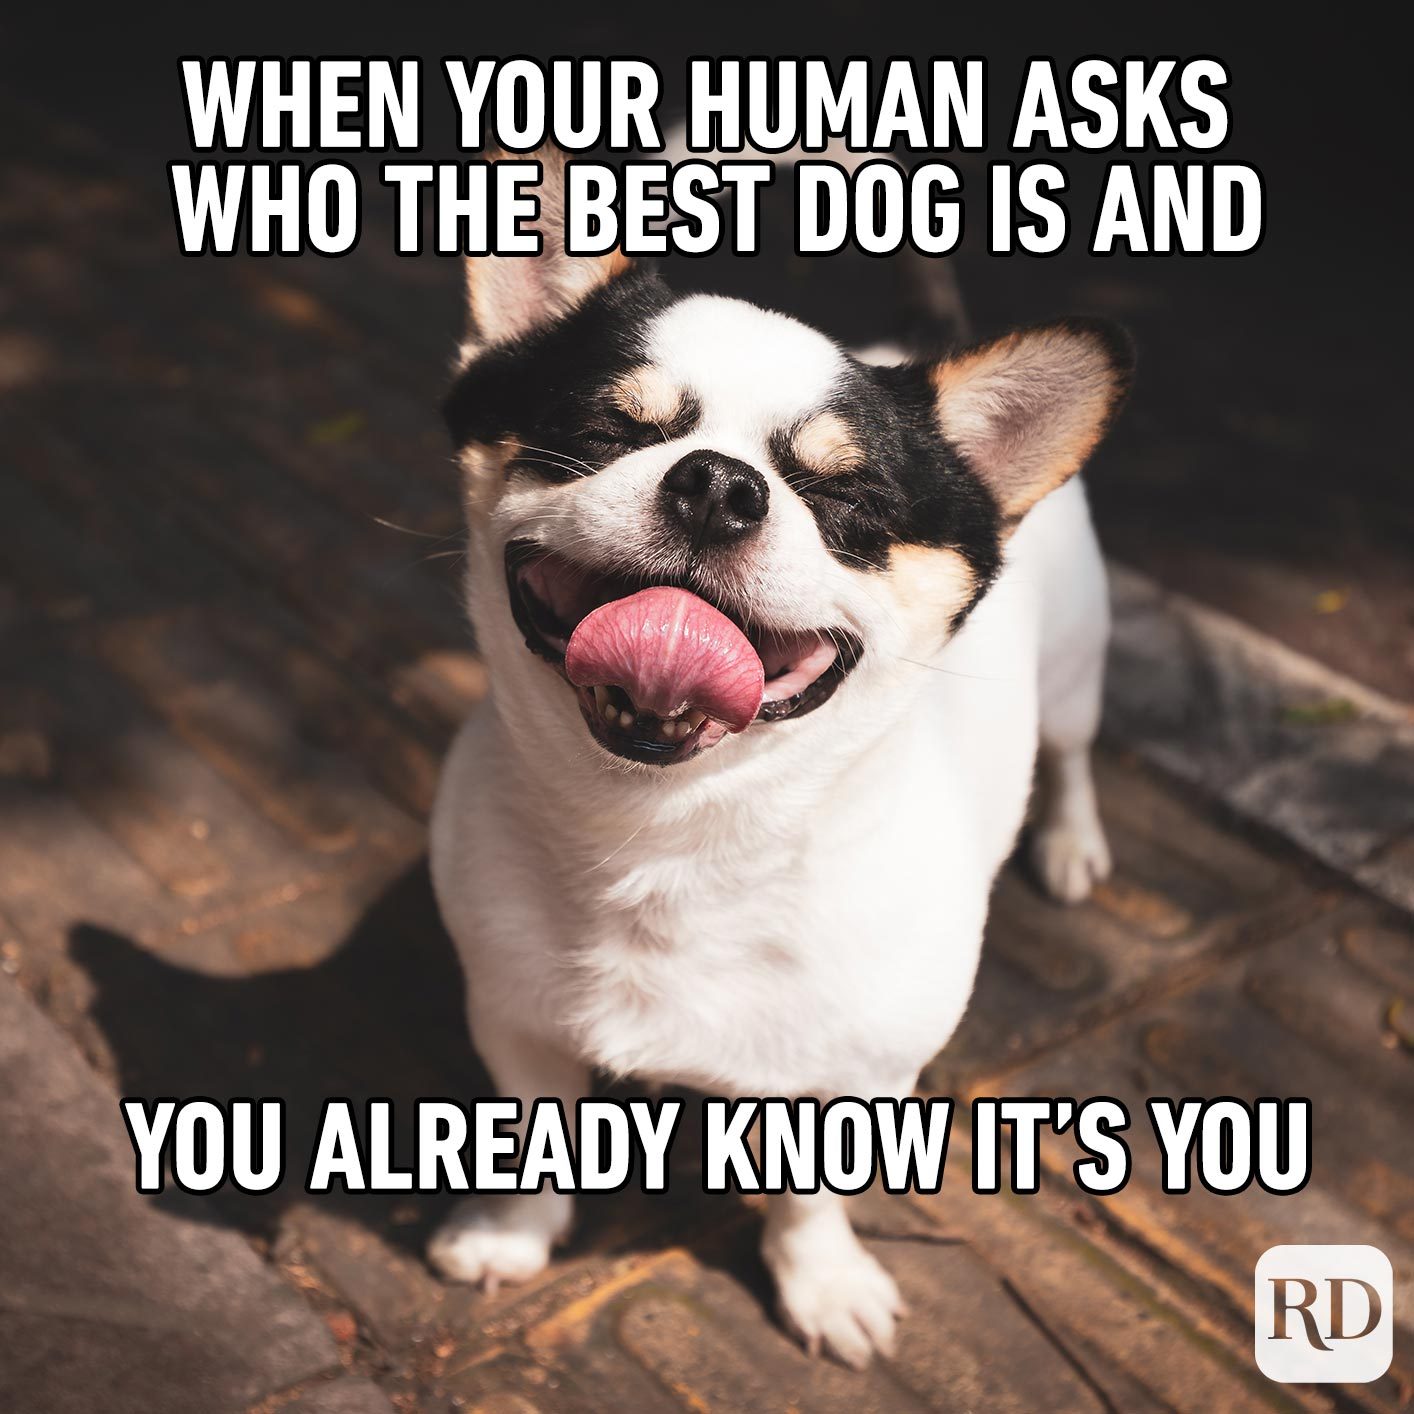 Happy smiling dog. Meme text: When your human asks who the best dog is and you already know it's you